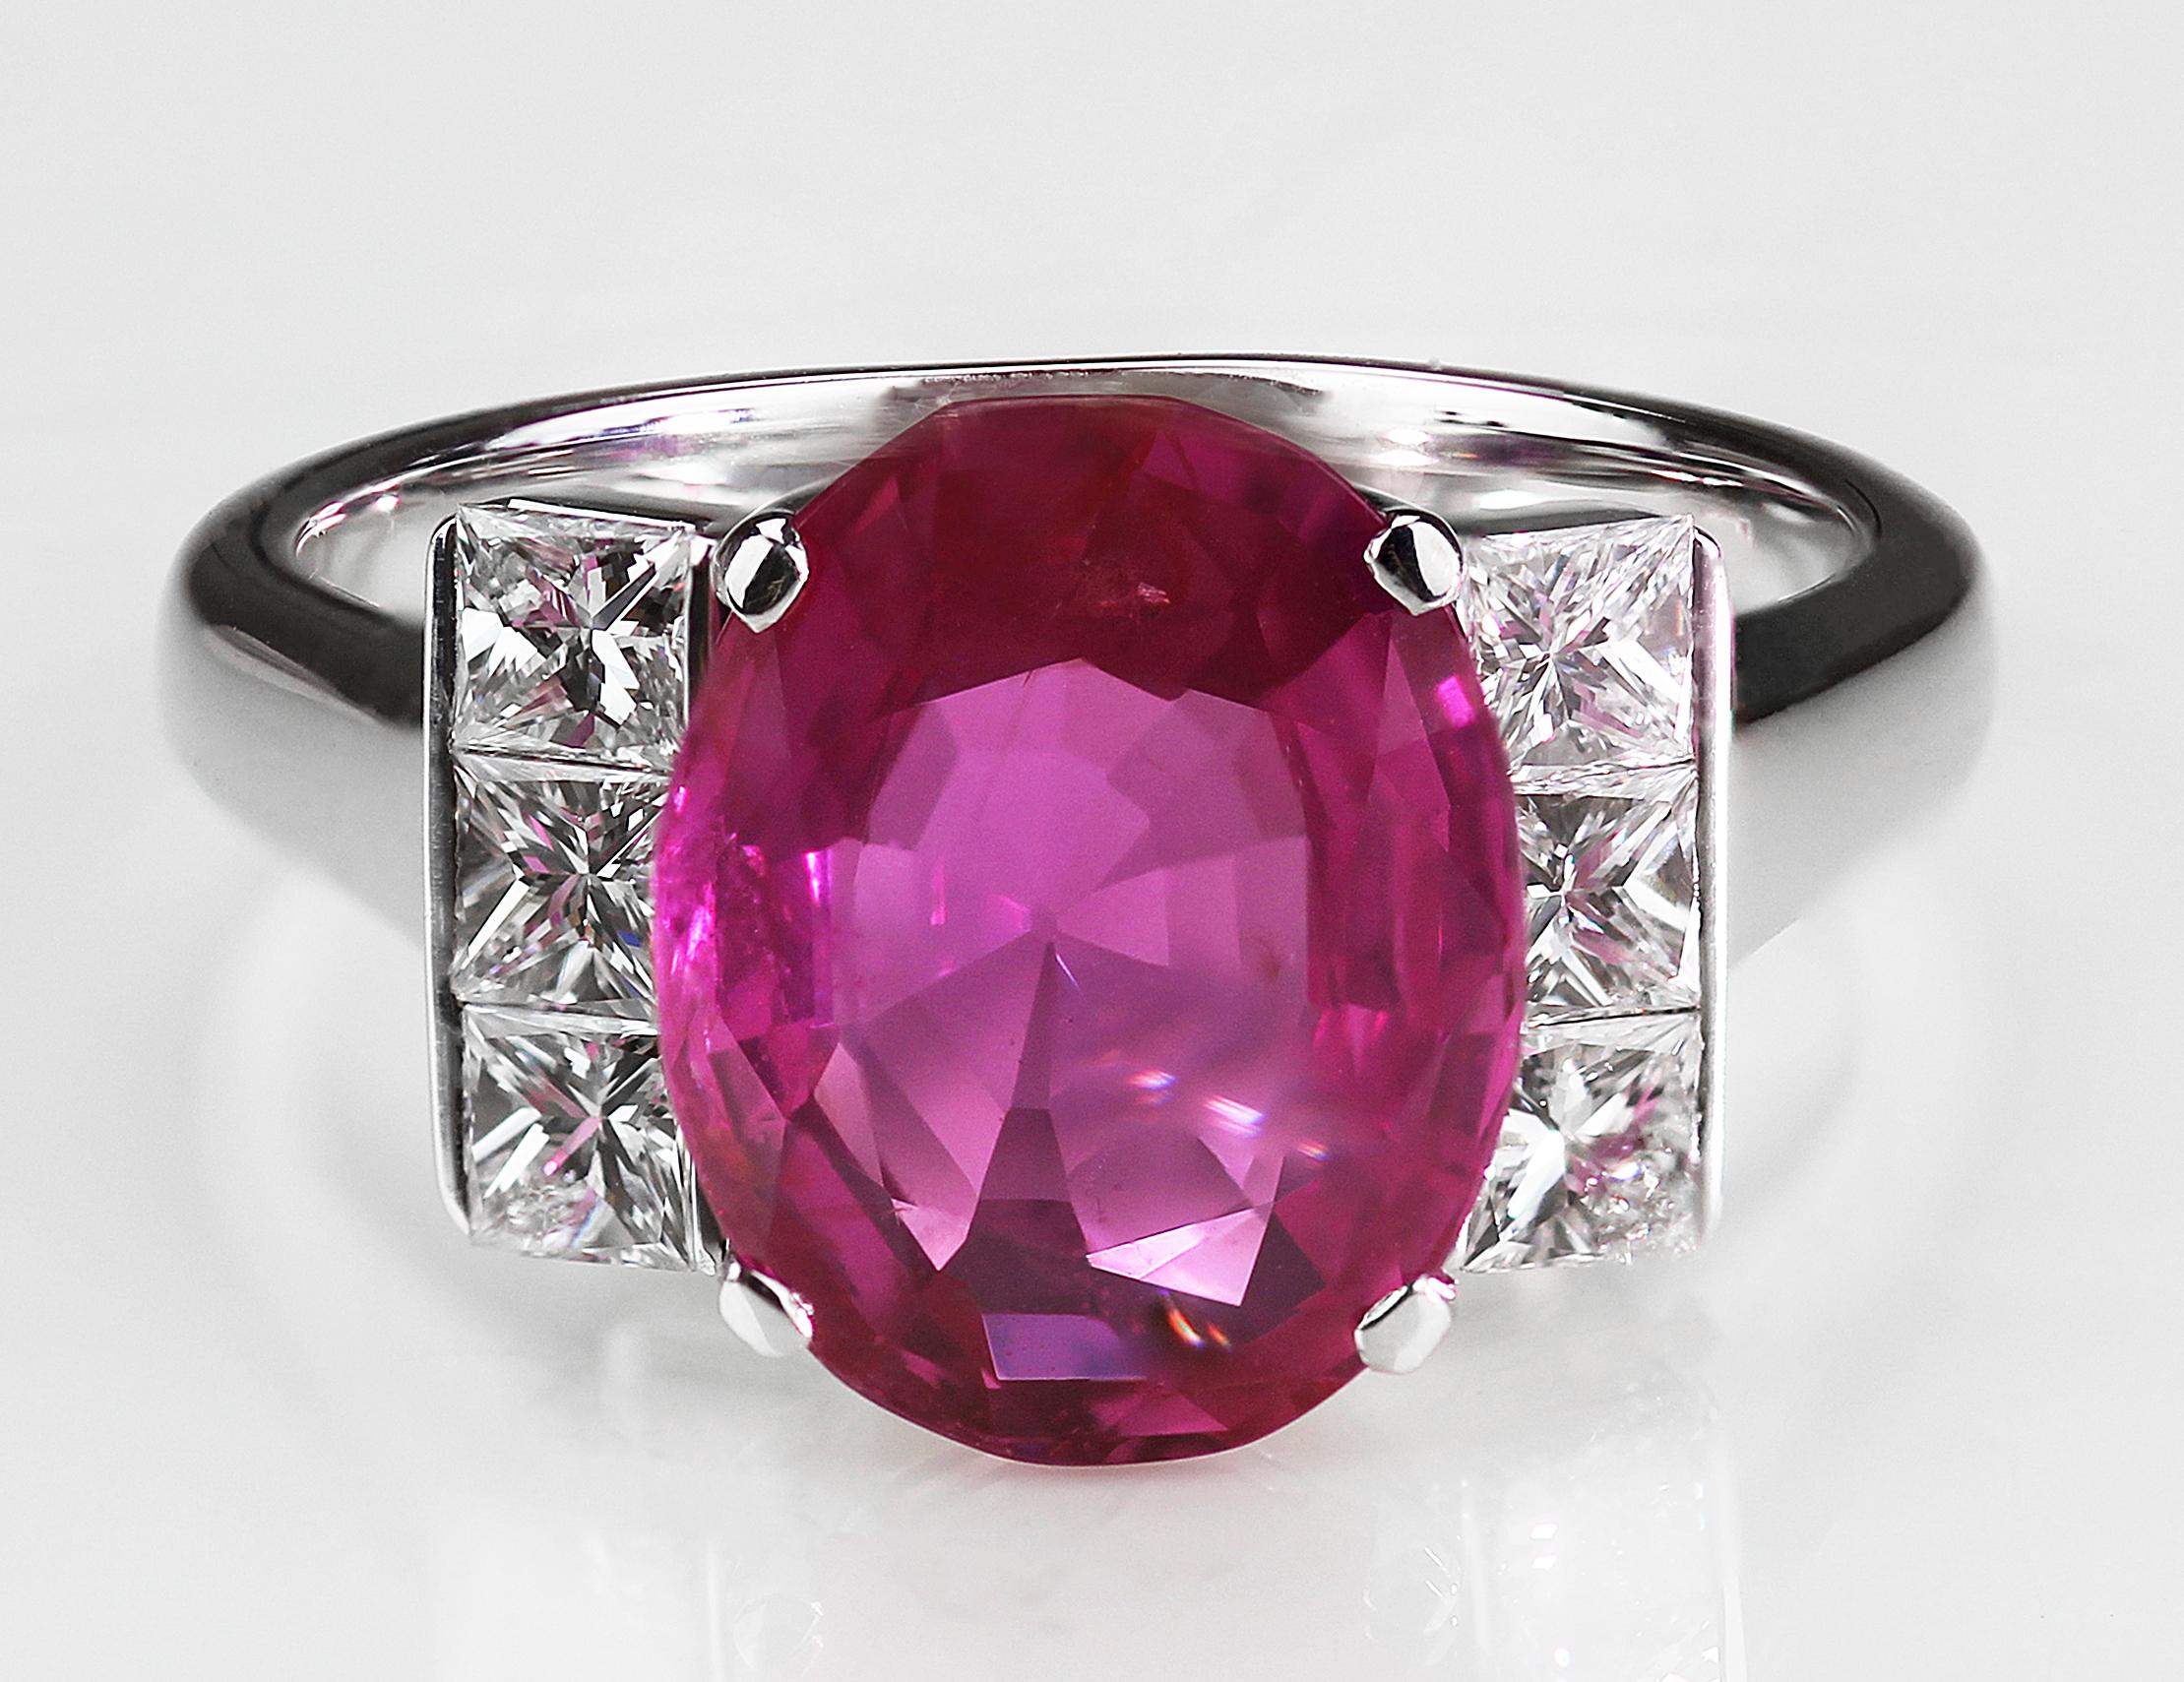 Gorgeous oval cut pinks sapphire and diamond shoulders ring consisting of a stunning vivid red-pink colour sapphire complimented with an icy glistening white of the princess cut diamonds beside it, set on on a 18ct white gold band.
1 x Oval cut Pink